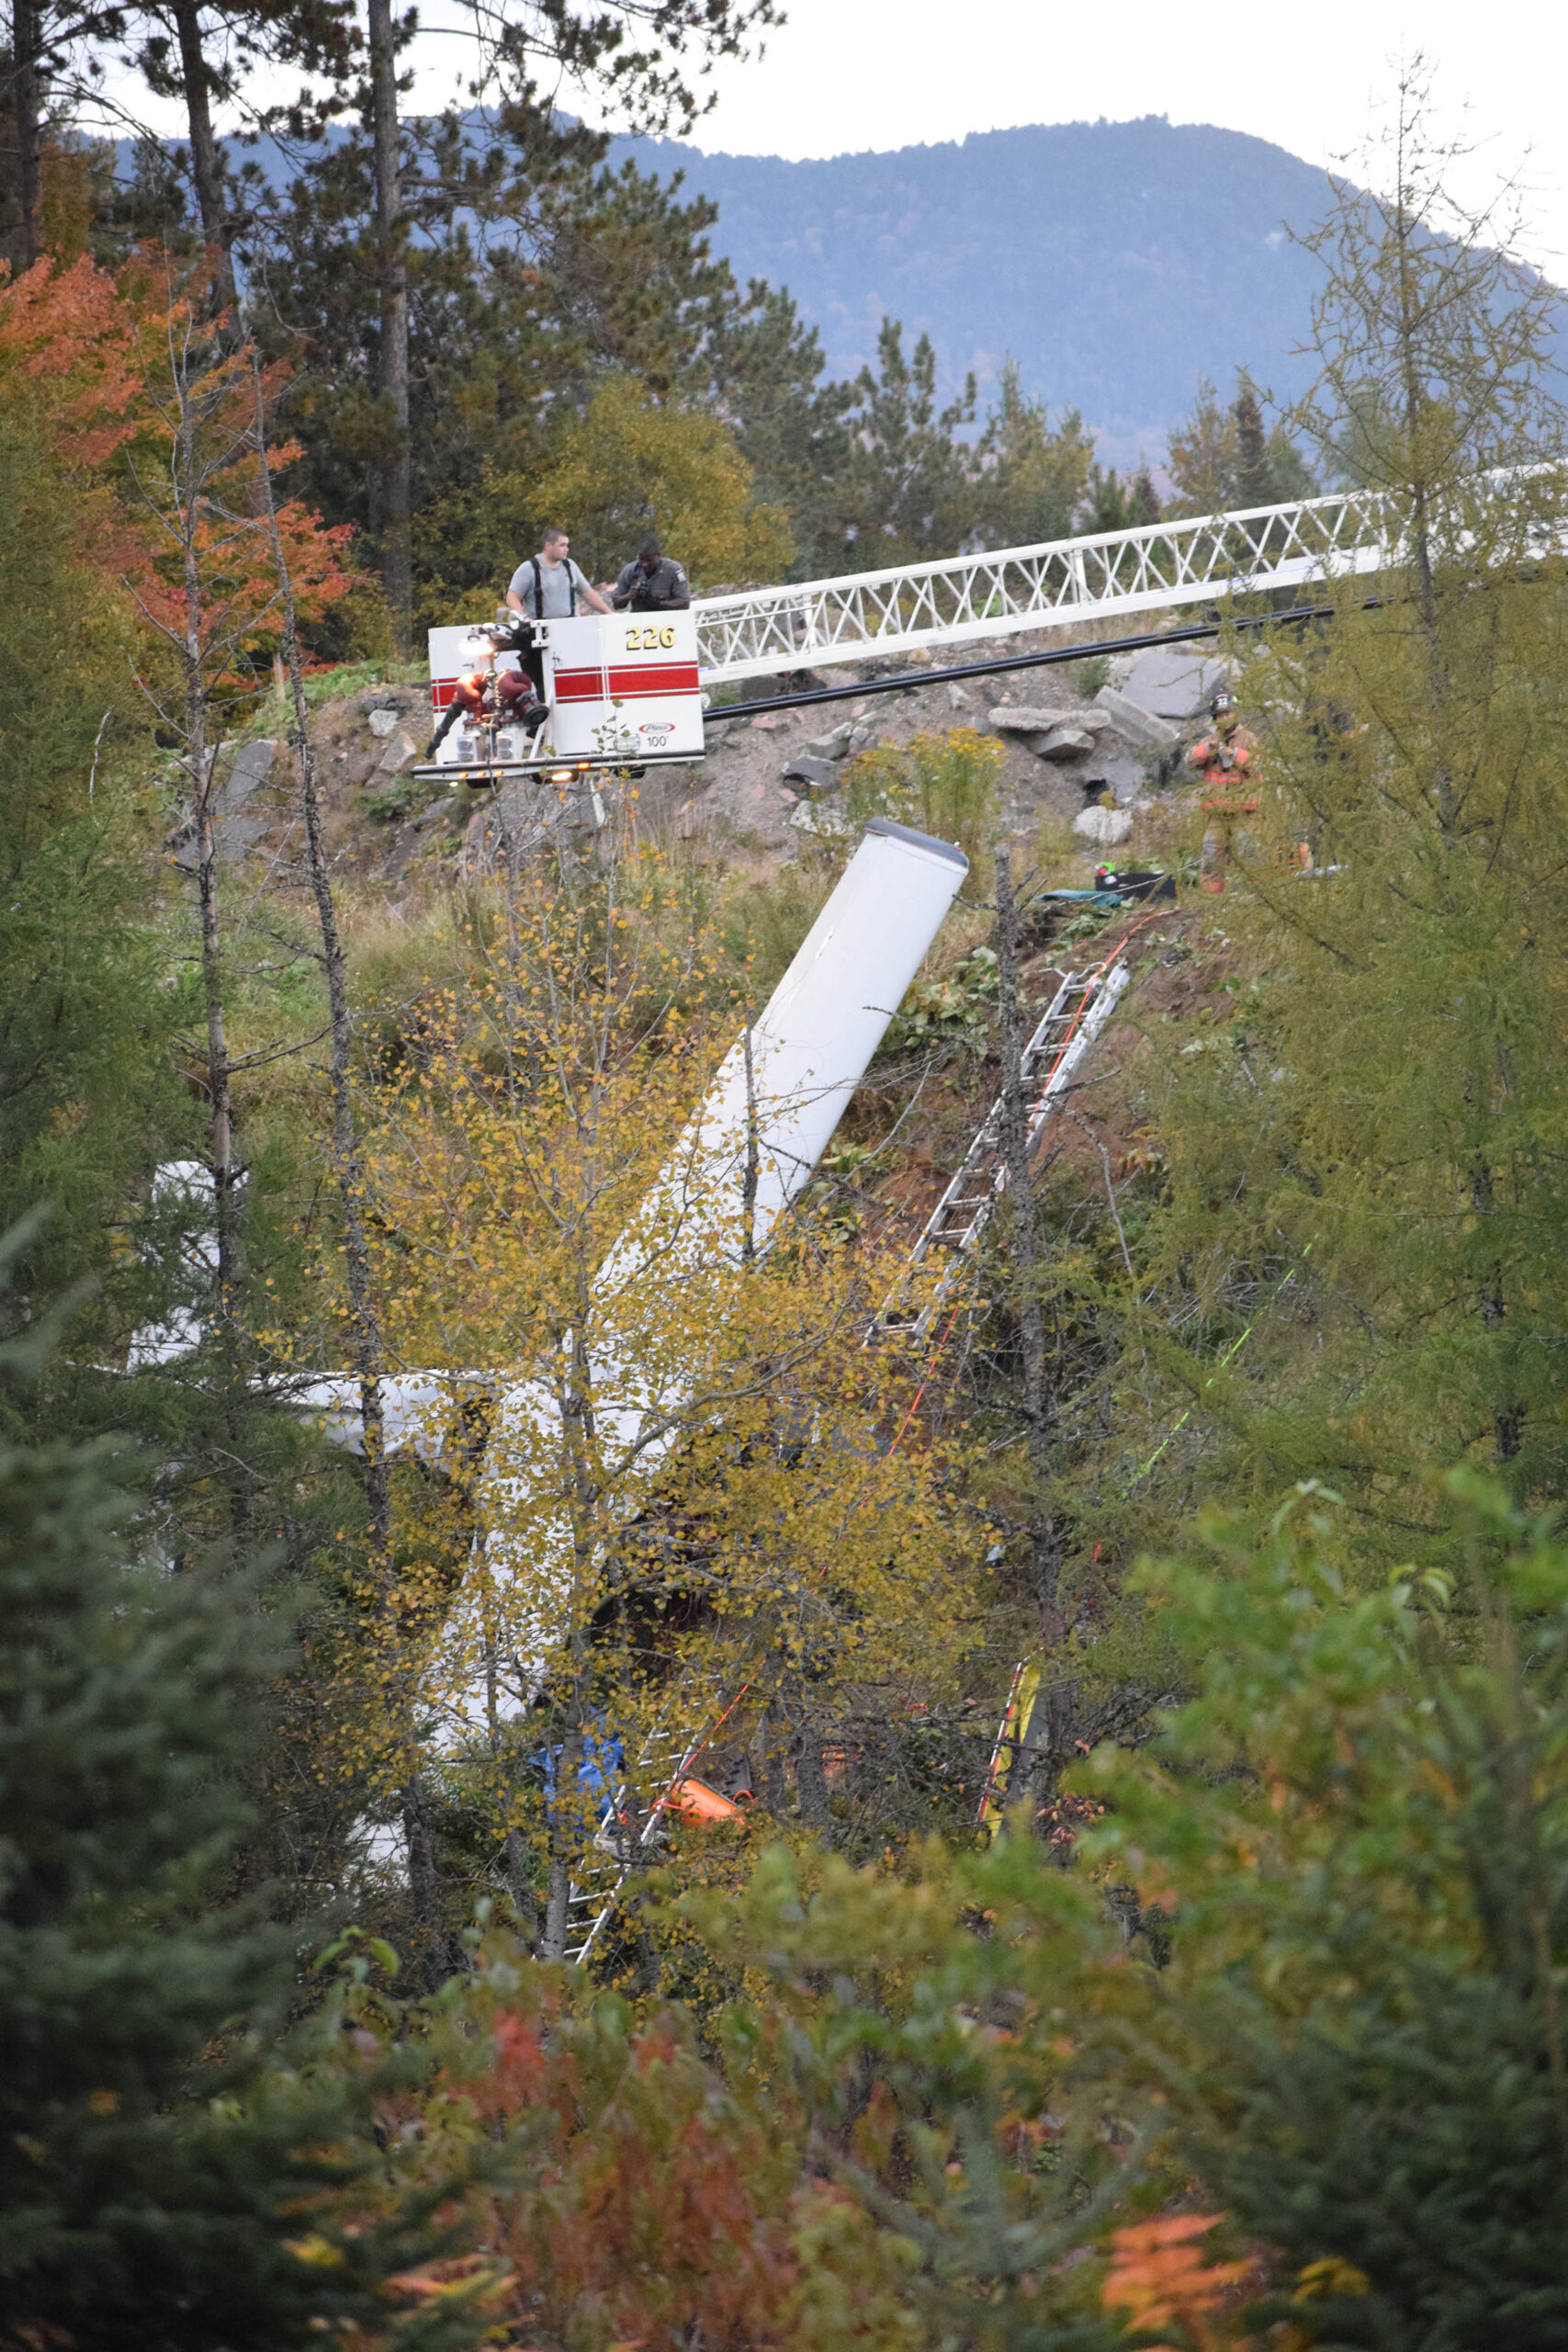 Two killed in Lake Placid airplane crash identified News, Sports